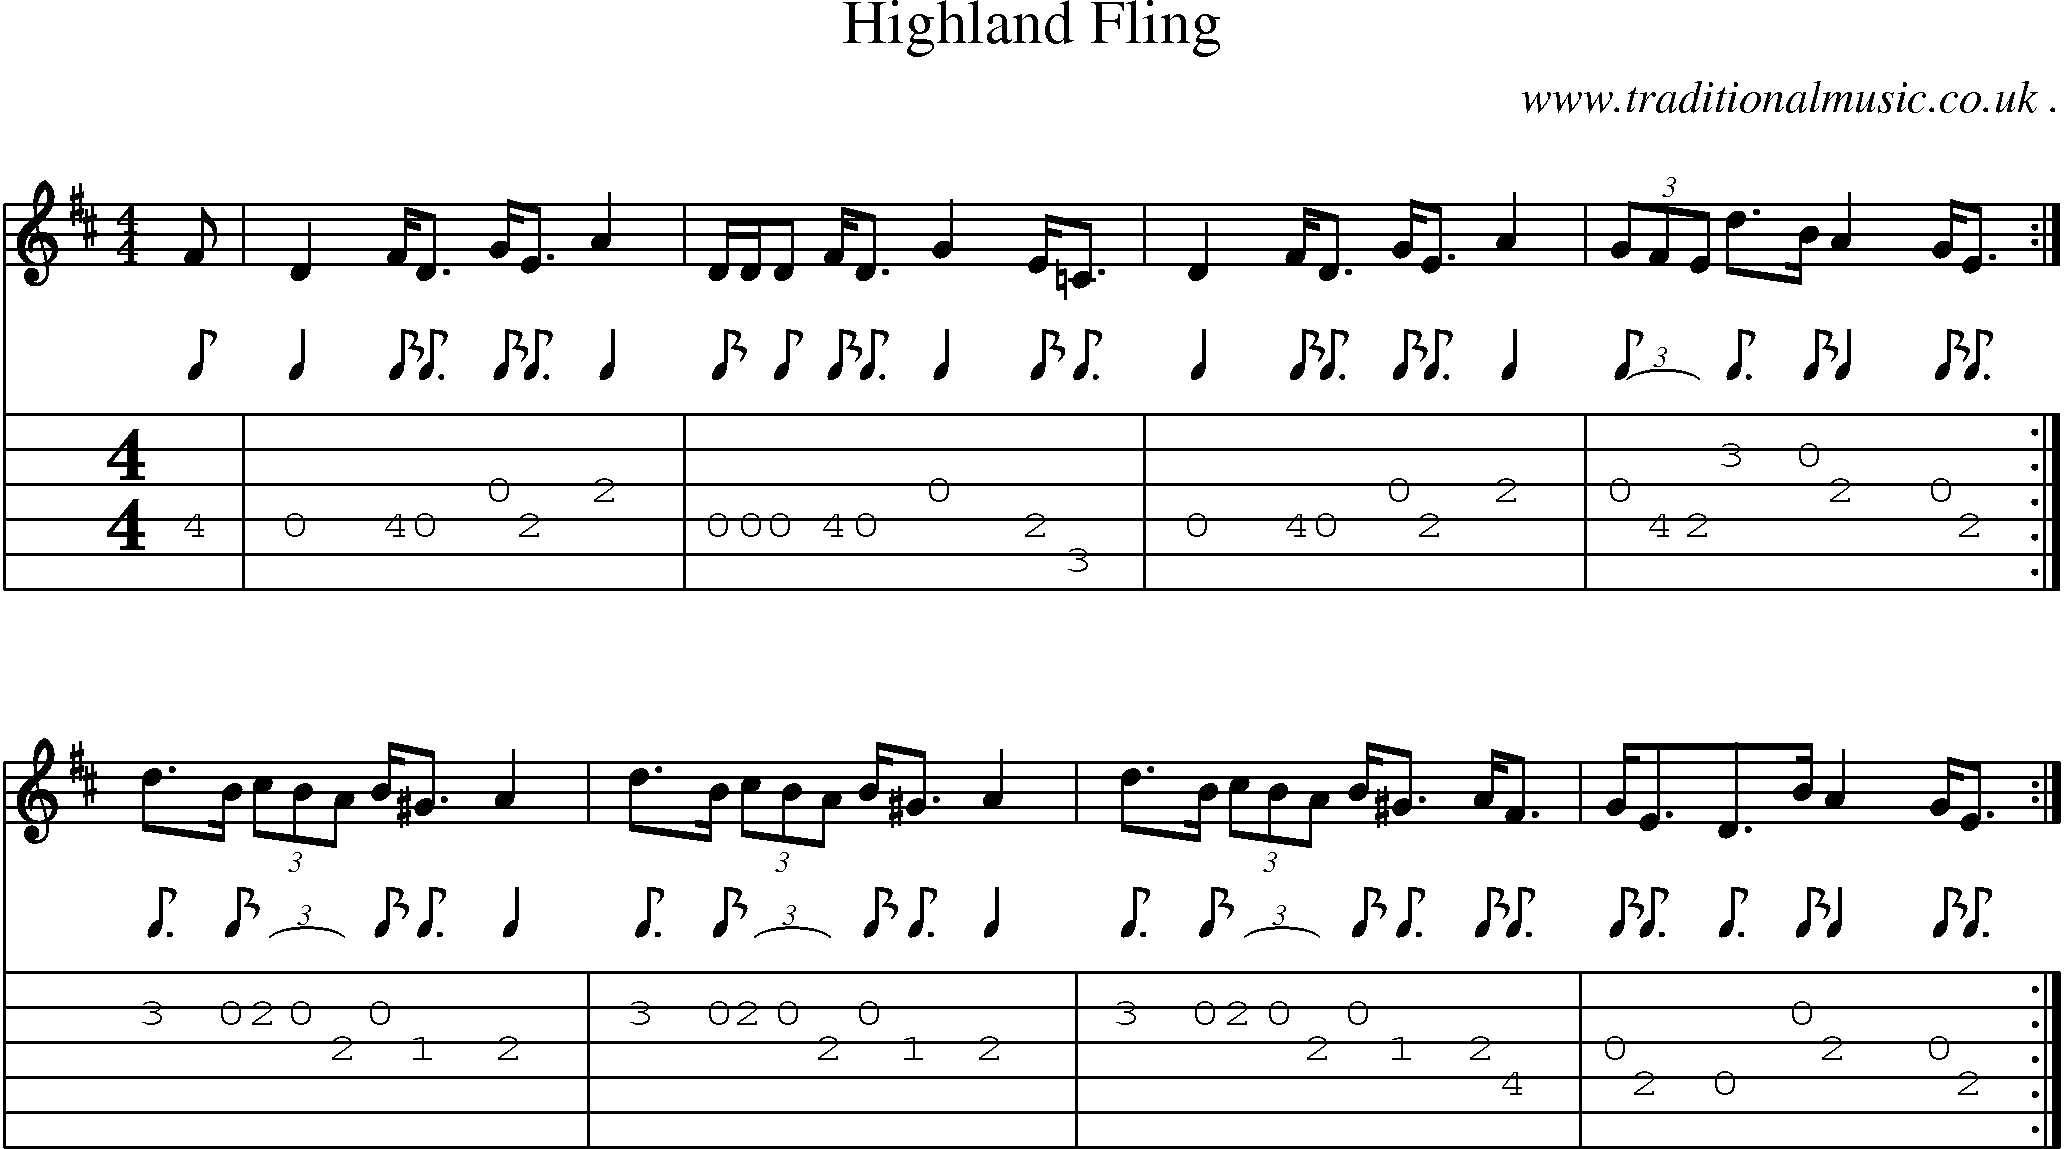 Sheet-Music and Guitar Tabs for Highland Fling